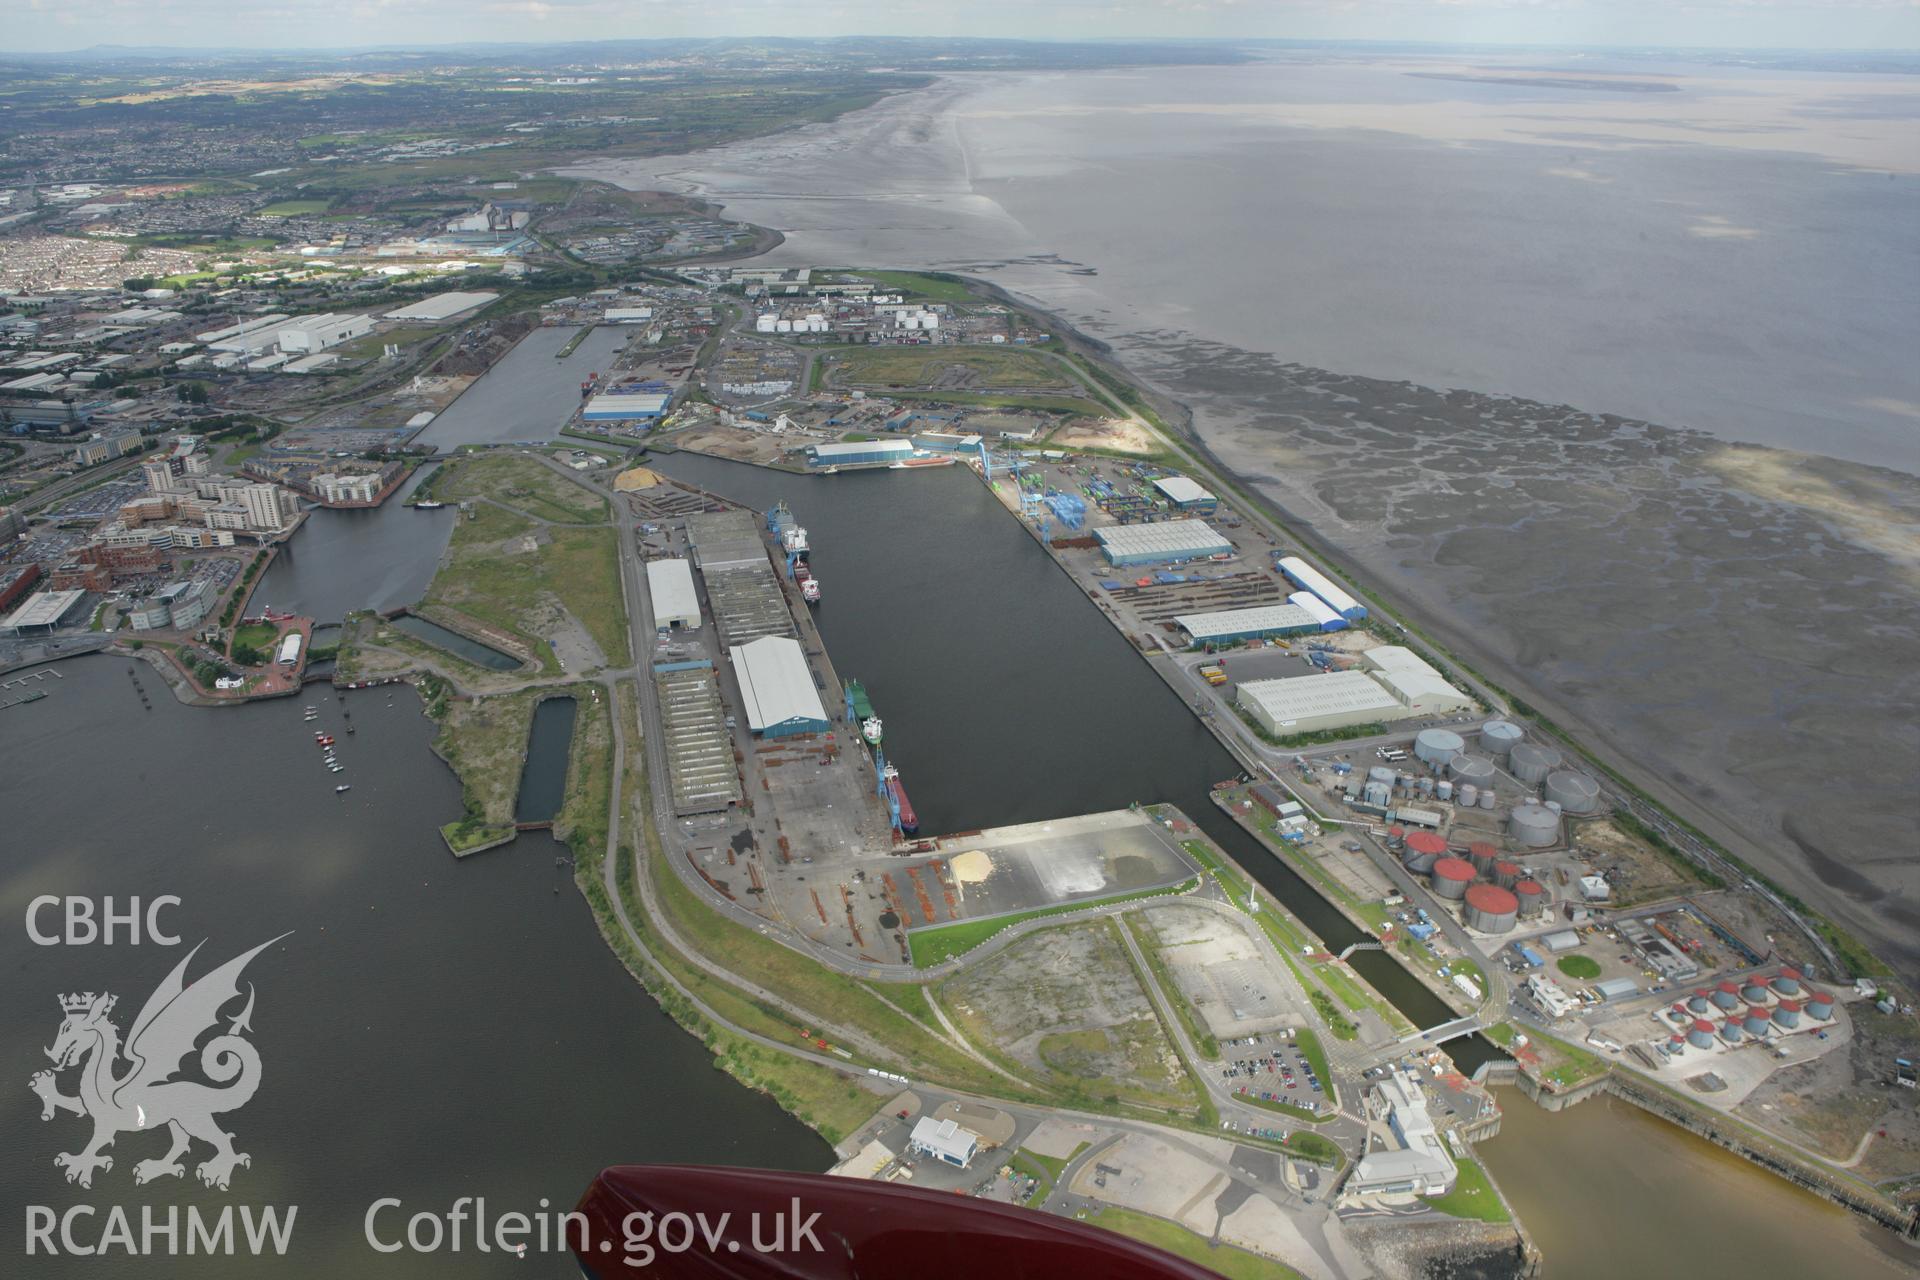 RCAHMW colour oblique aerial photograph of Queen Alexandra Dock in Cardiff Docks. Taken on 30 July 2007 by Toby Driver